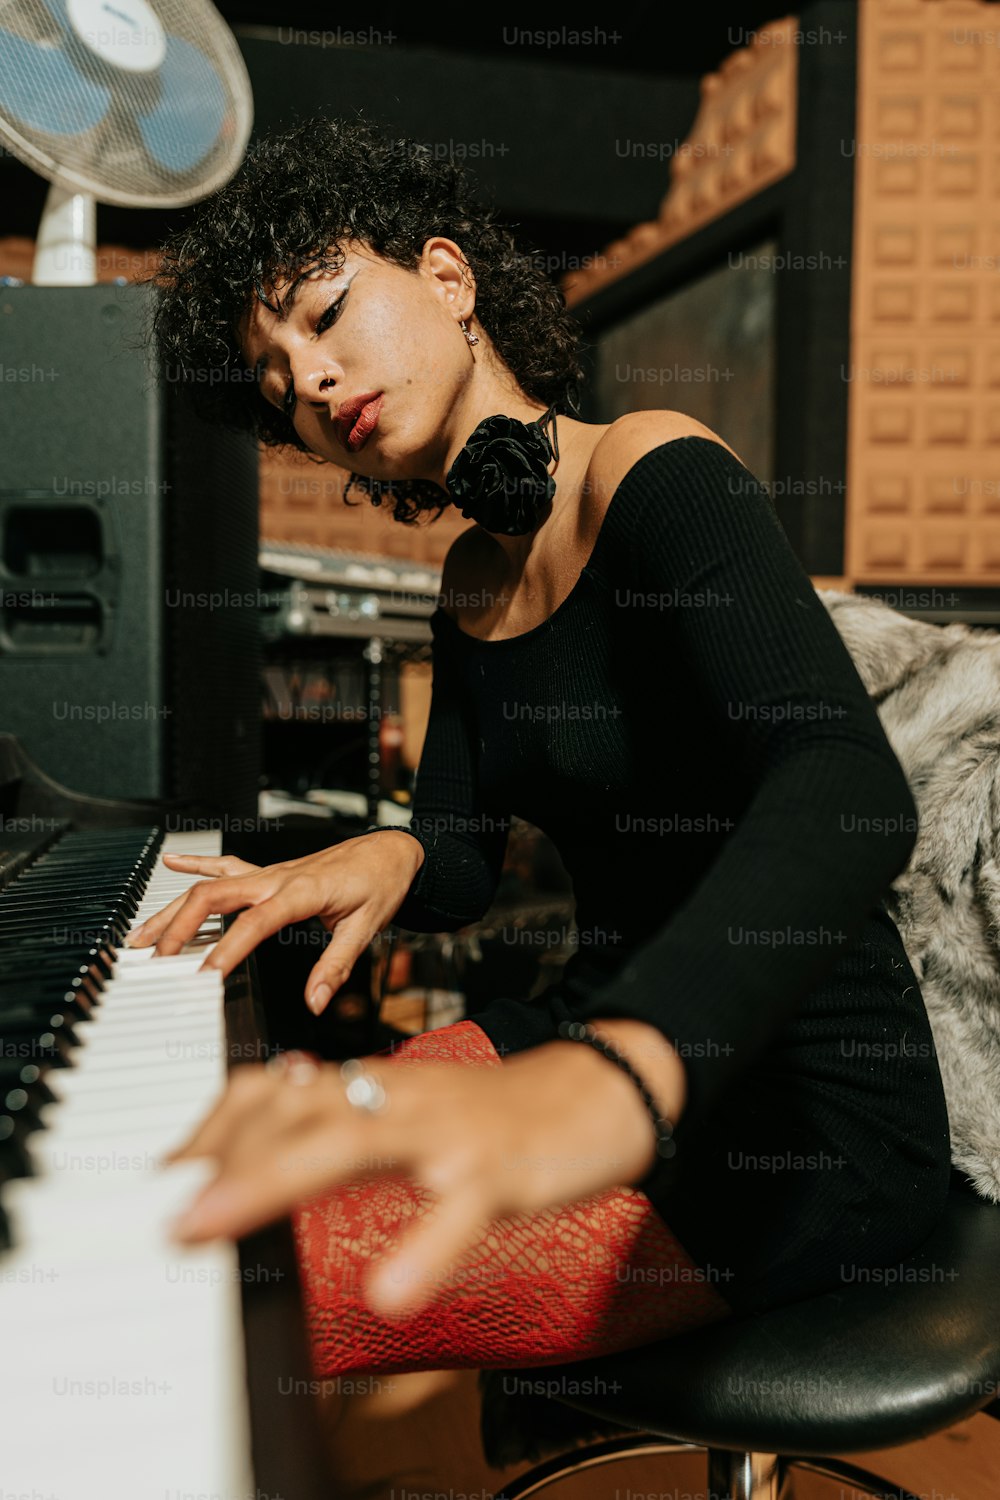 a woman sitting at a piano in a room